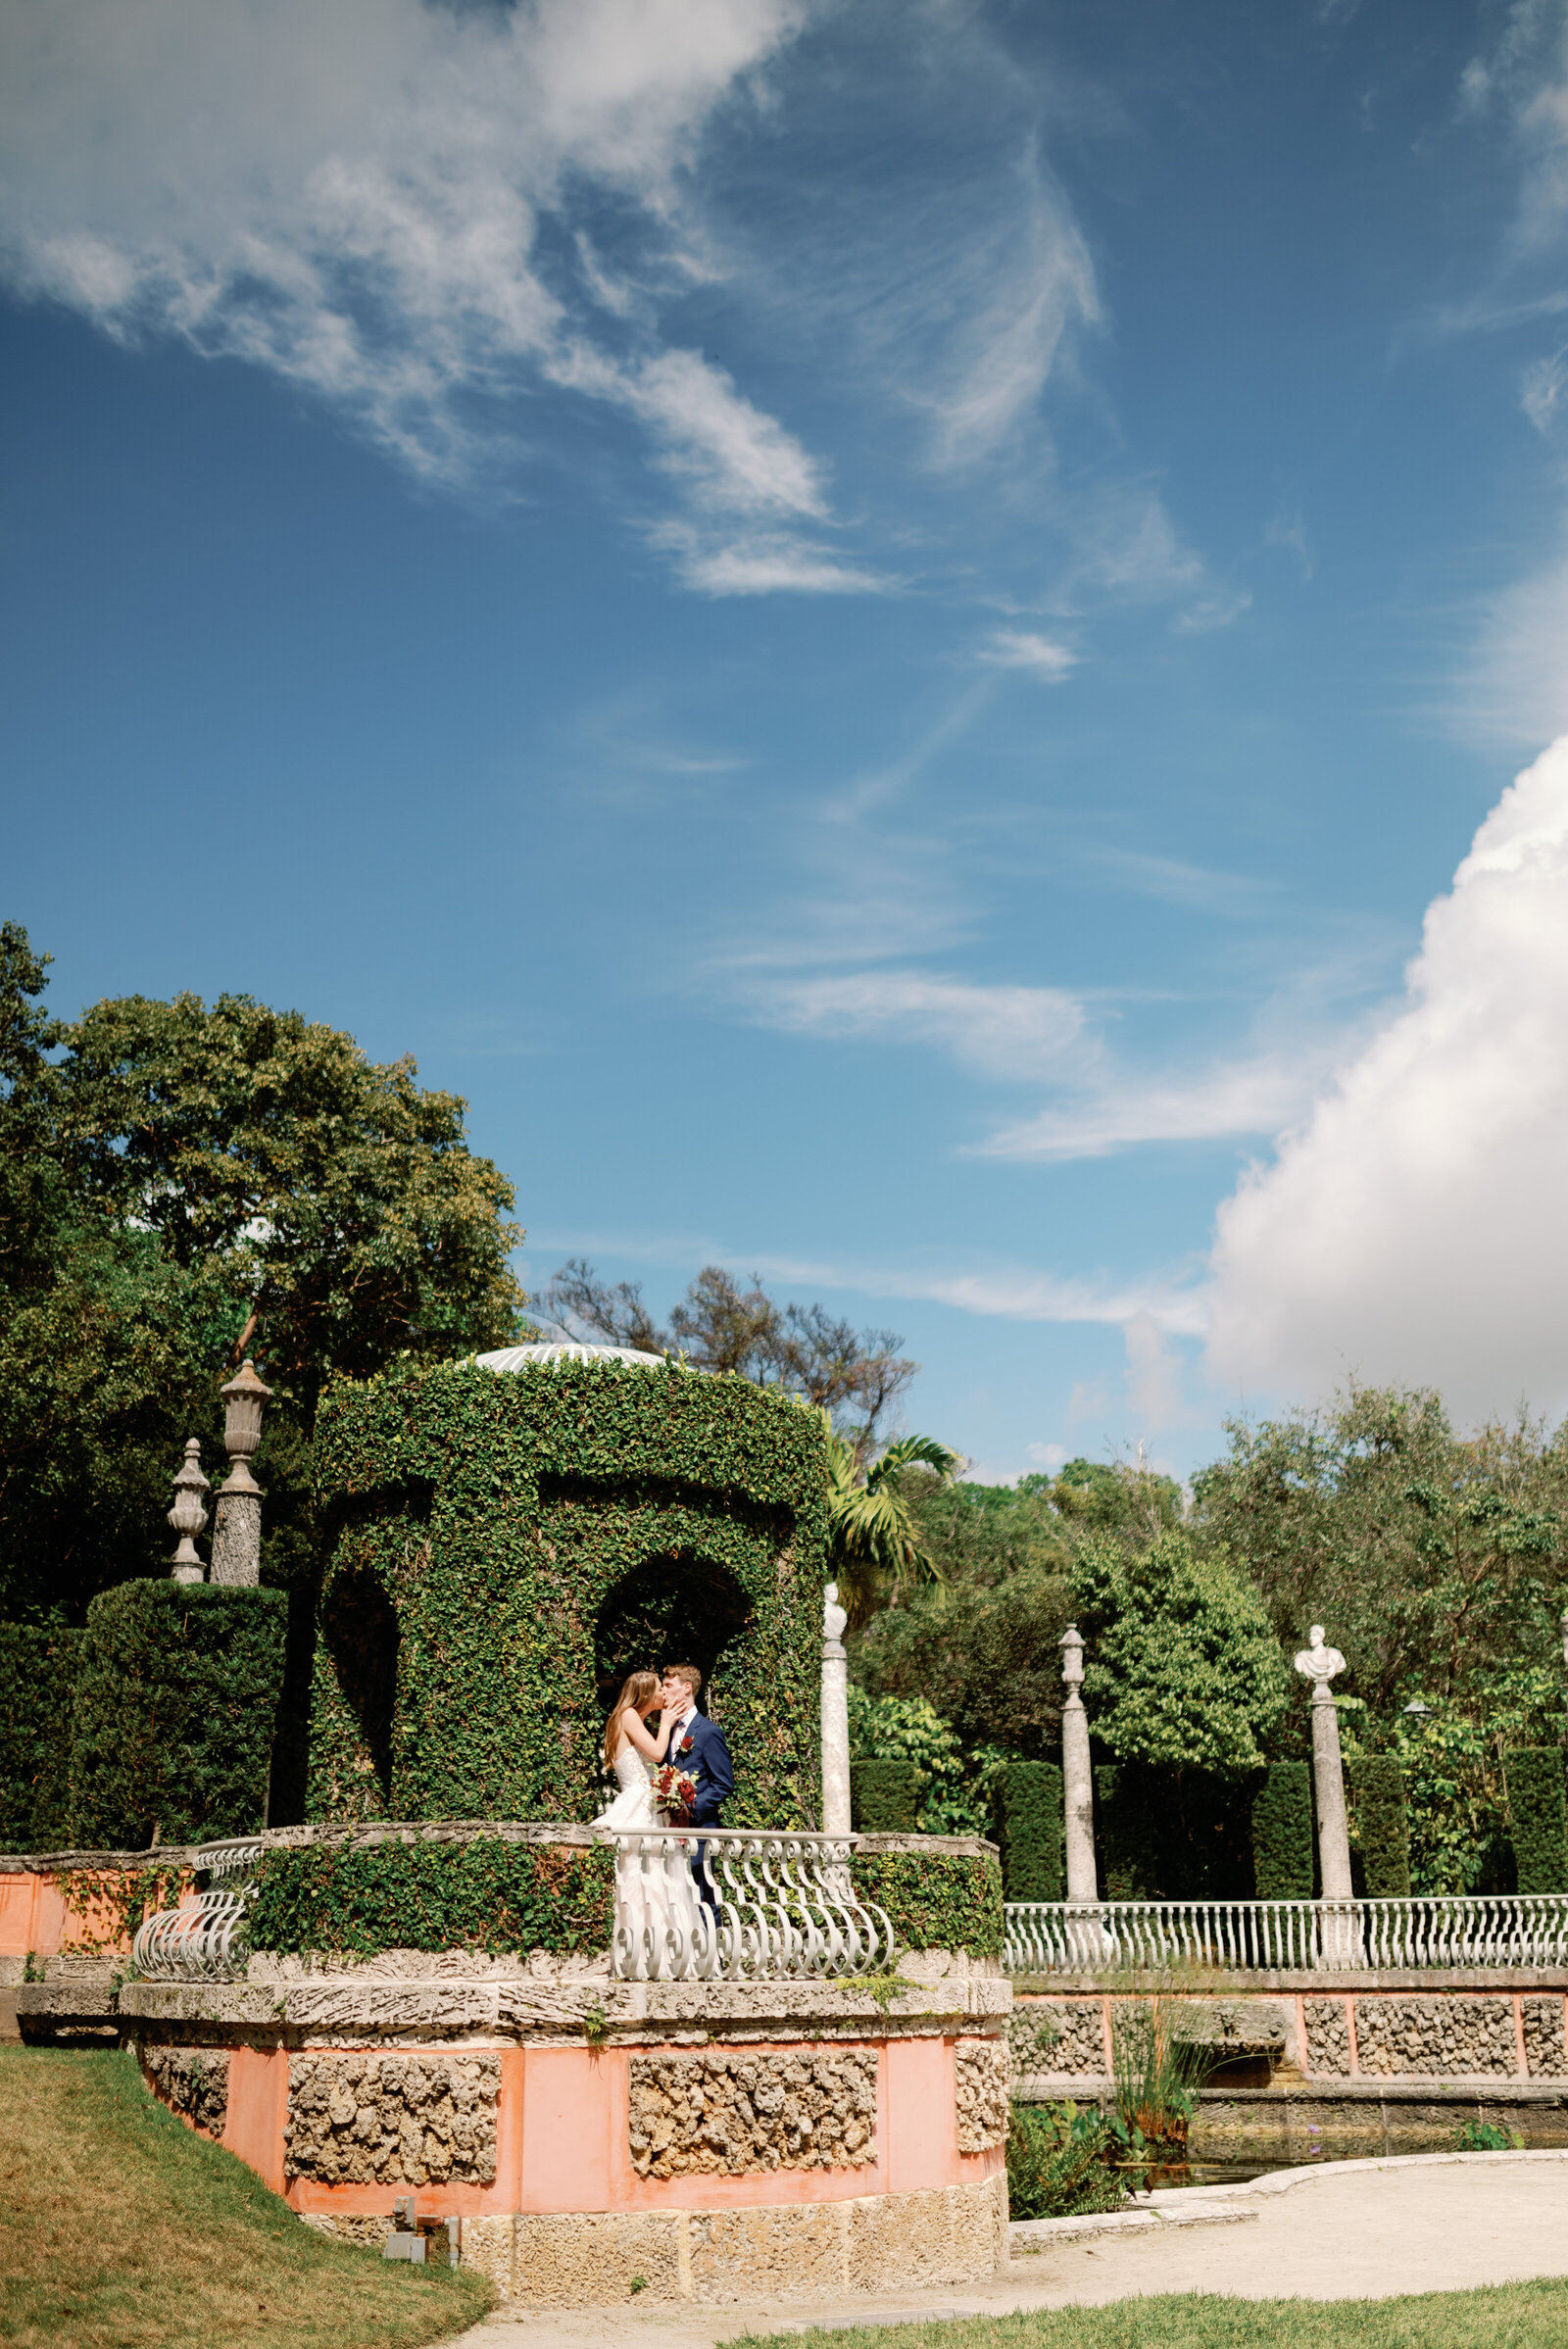 Wide view of bride and groom in an ivy covered garden tower